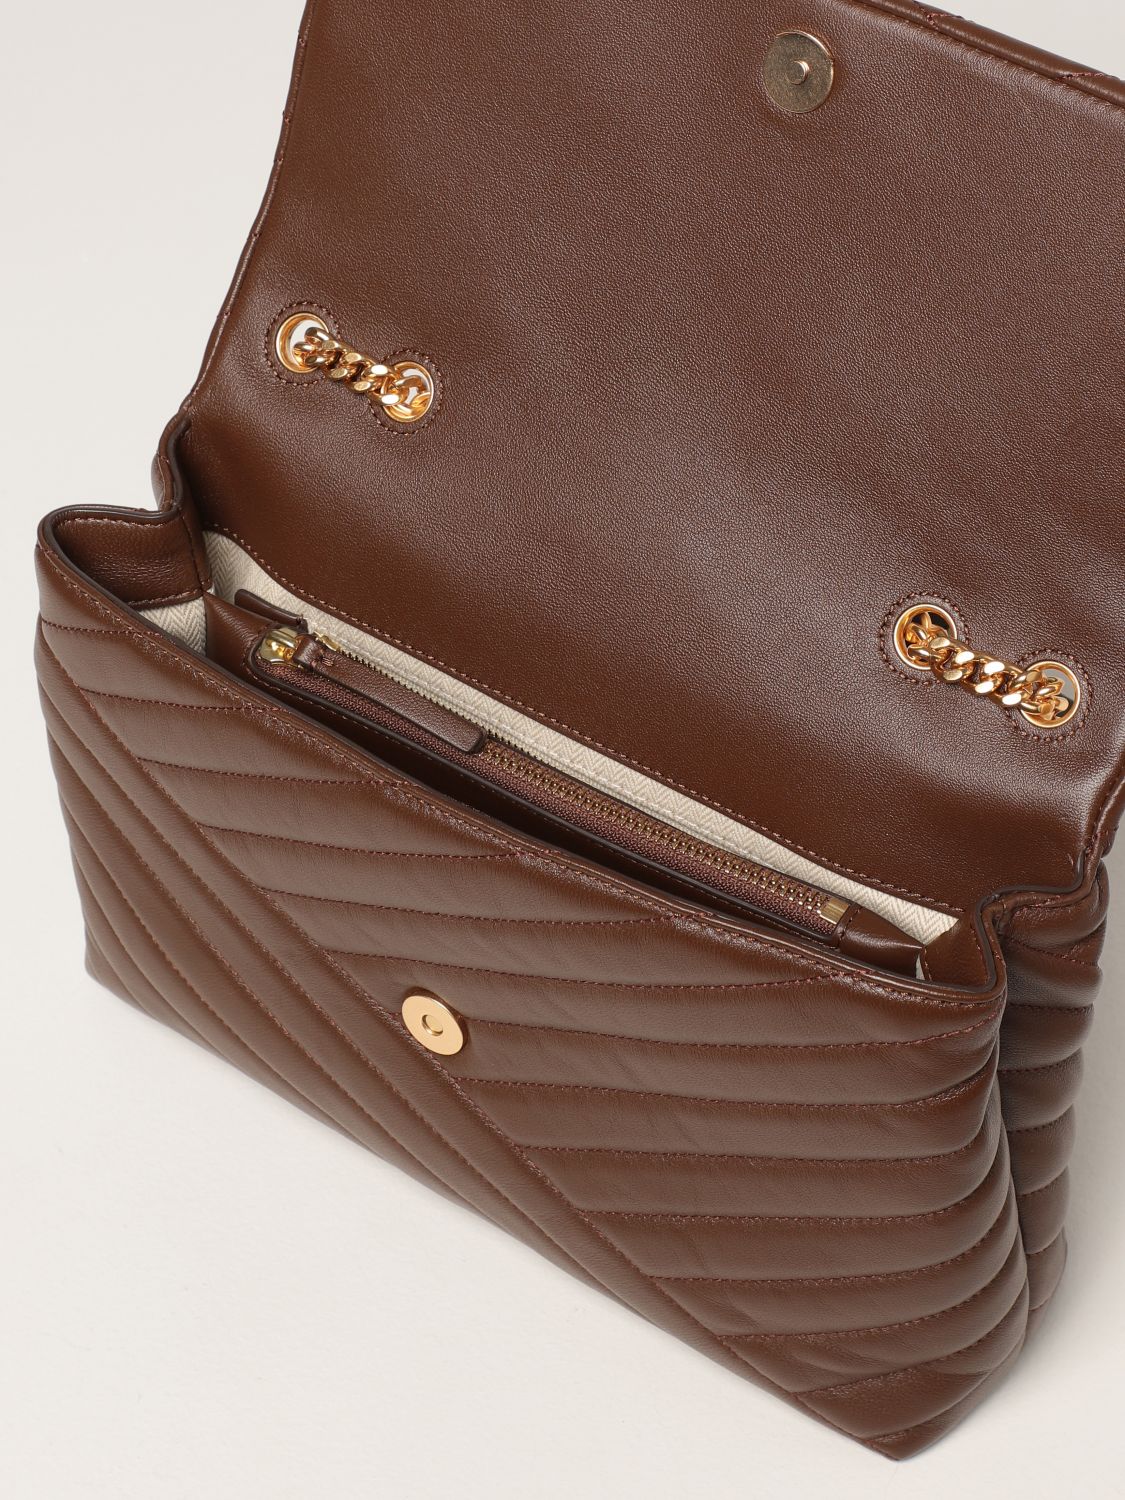 TORY BURCH: Kira bag in quilted leather - Brown | Tory Burch crossbody bags  58465 online on 